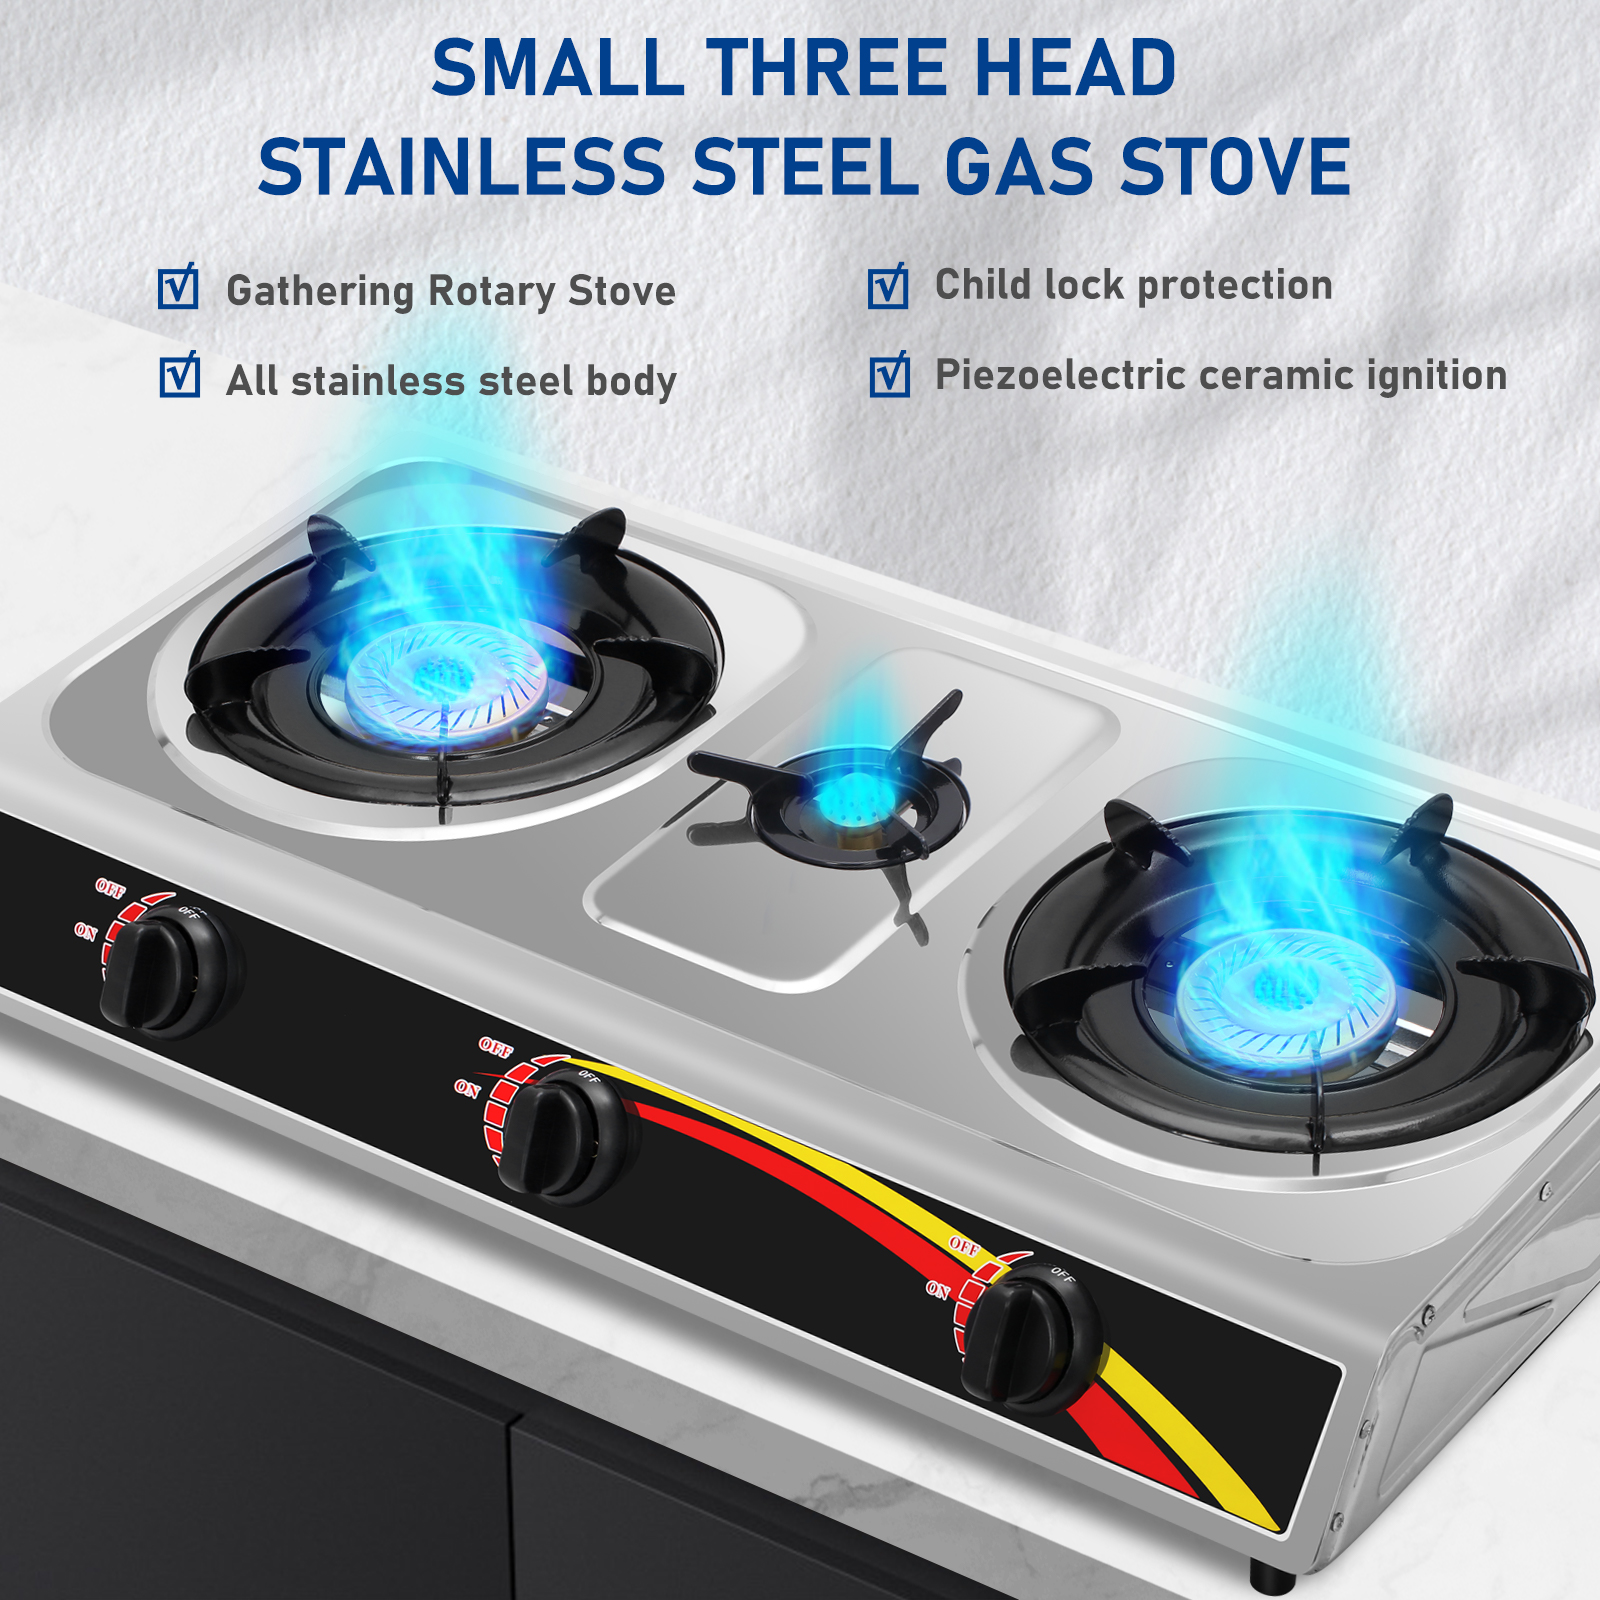 Jadeshay Propane Gas Cooktop 3 Burners Gas Stove Portable Gas Stove Thickened Stainless Steel Double Burners Stove Auto Ignition Camping Double Burner LPG for RV,Apartments,Outdoor - image 4 of 10